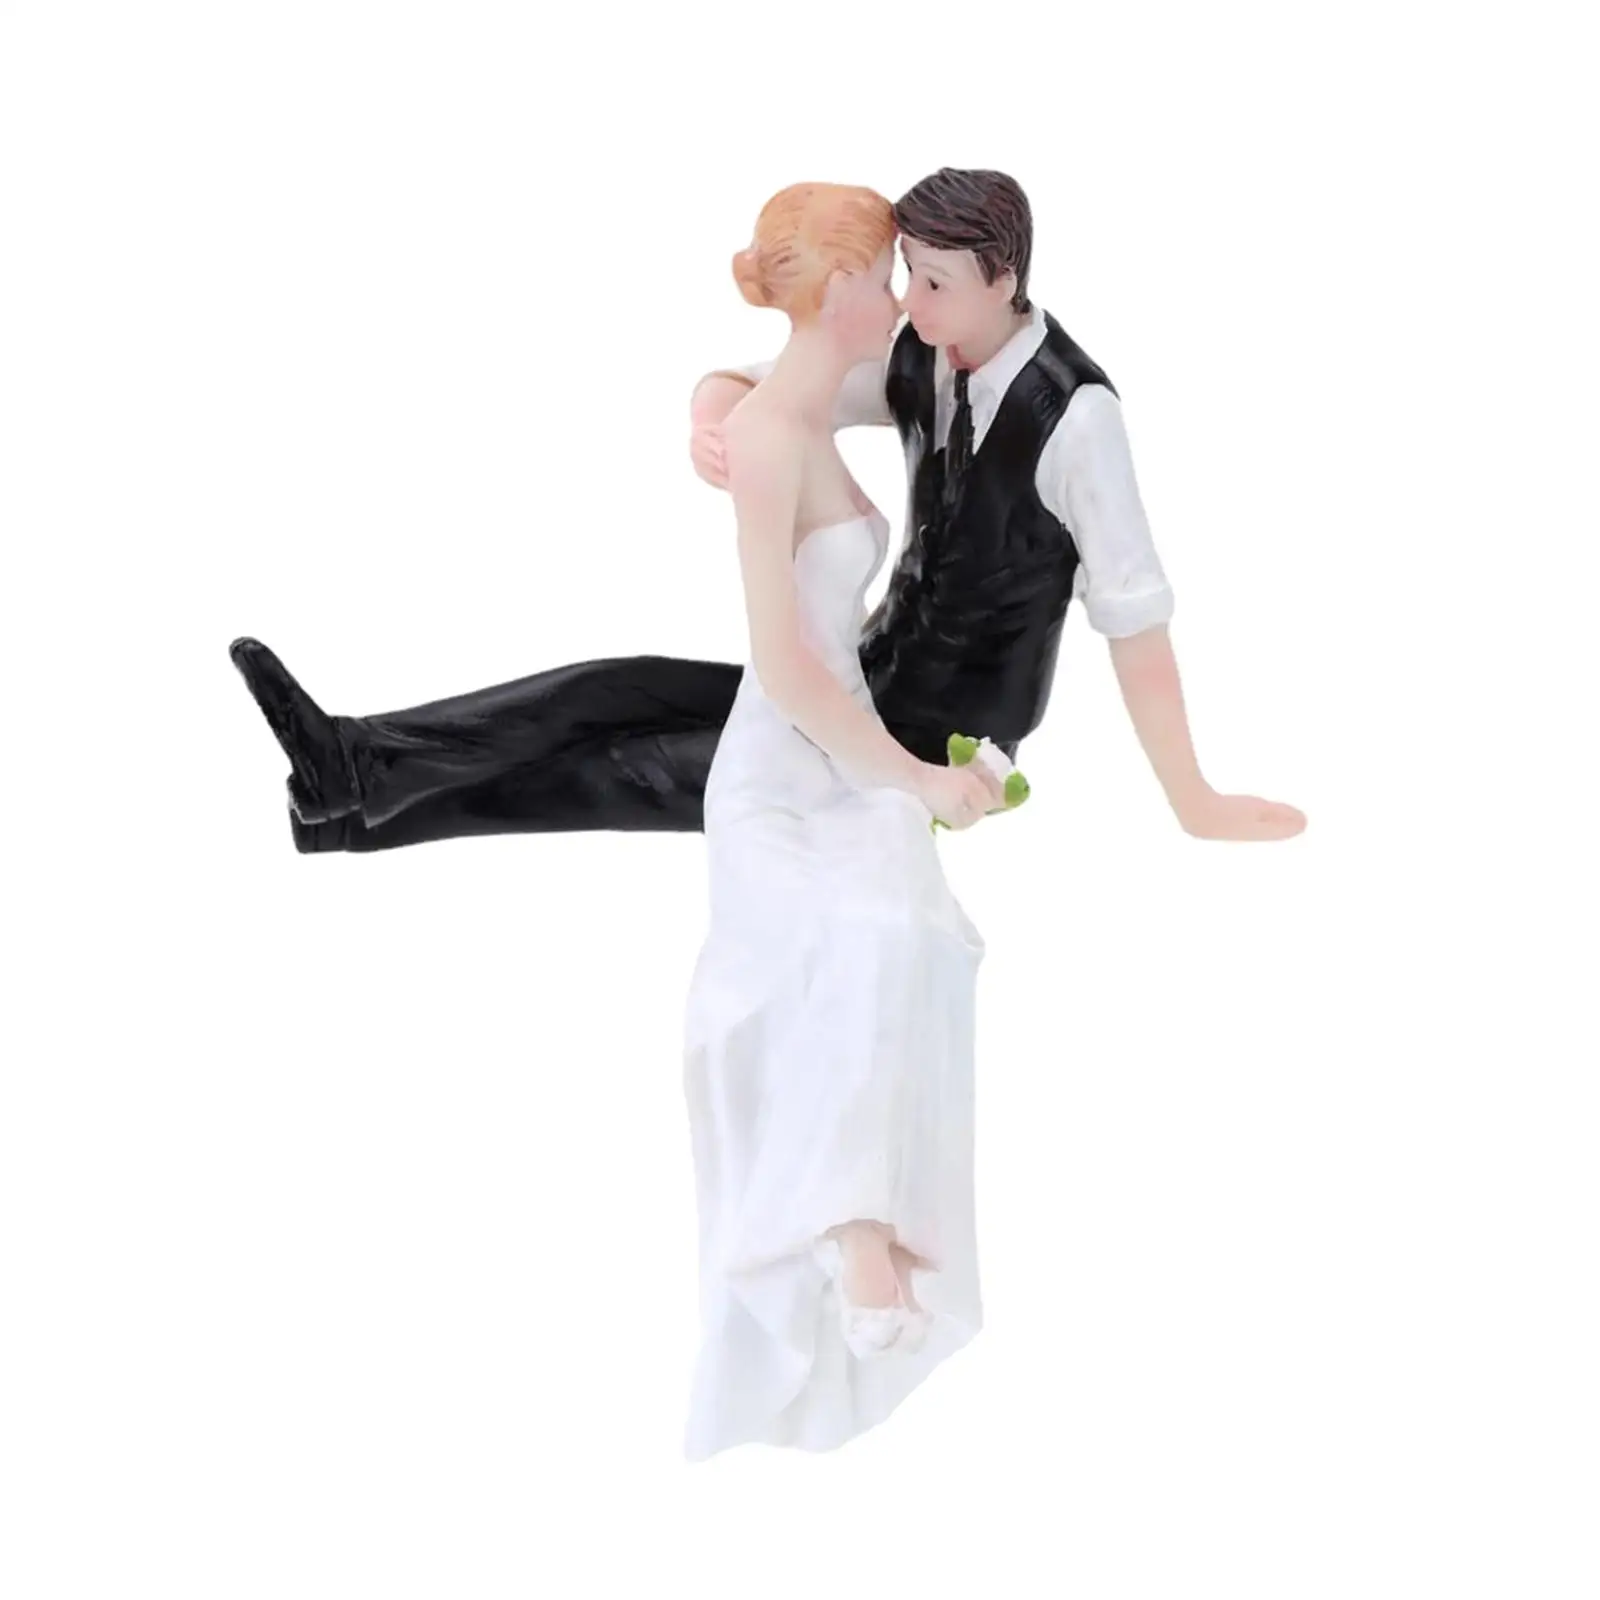 Wedding Cake Toppers Novelty Bride and Groom Figurines for Anniversary Ceremony Bridal Showers Table Centerpiece Party Supplies